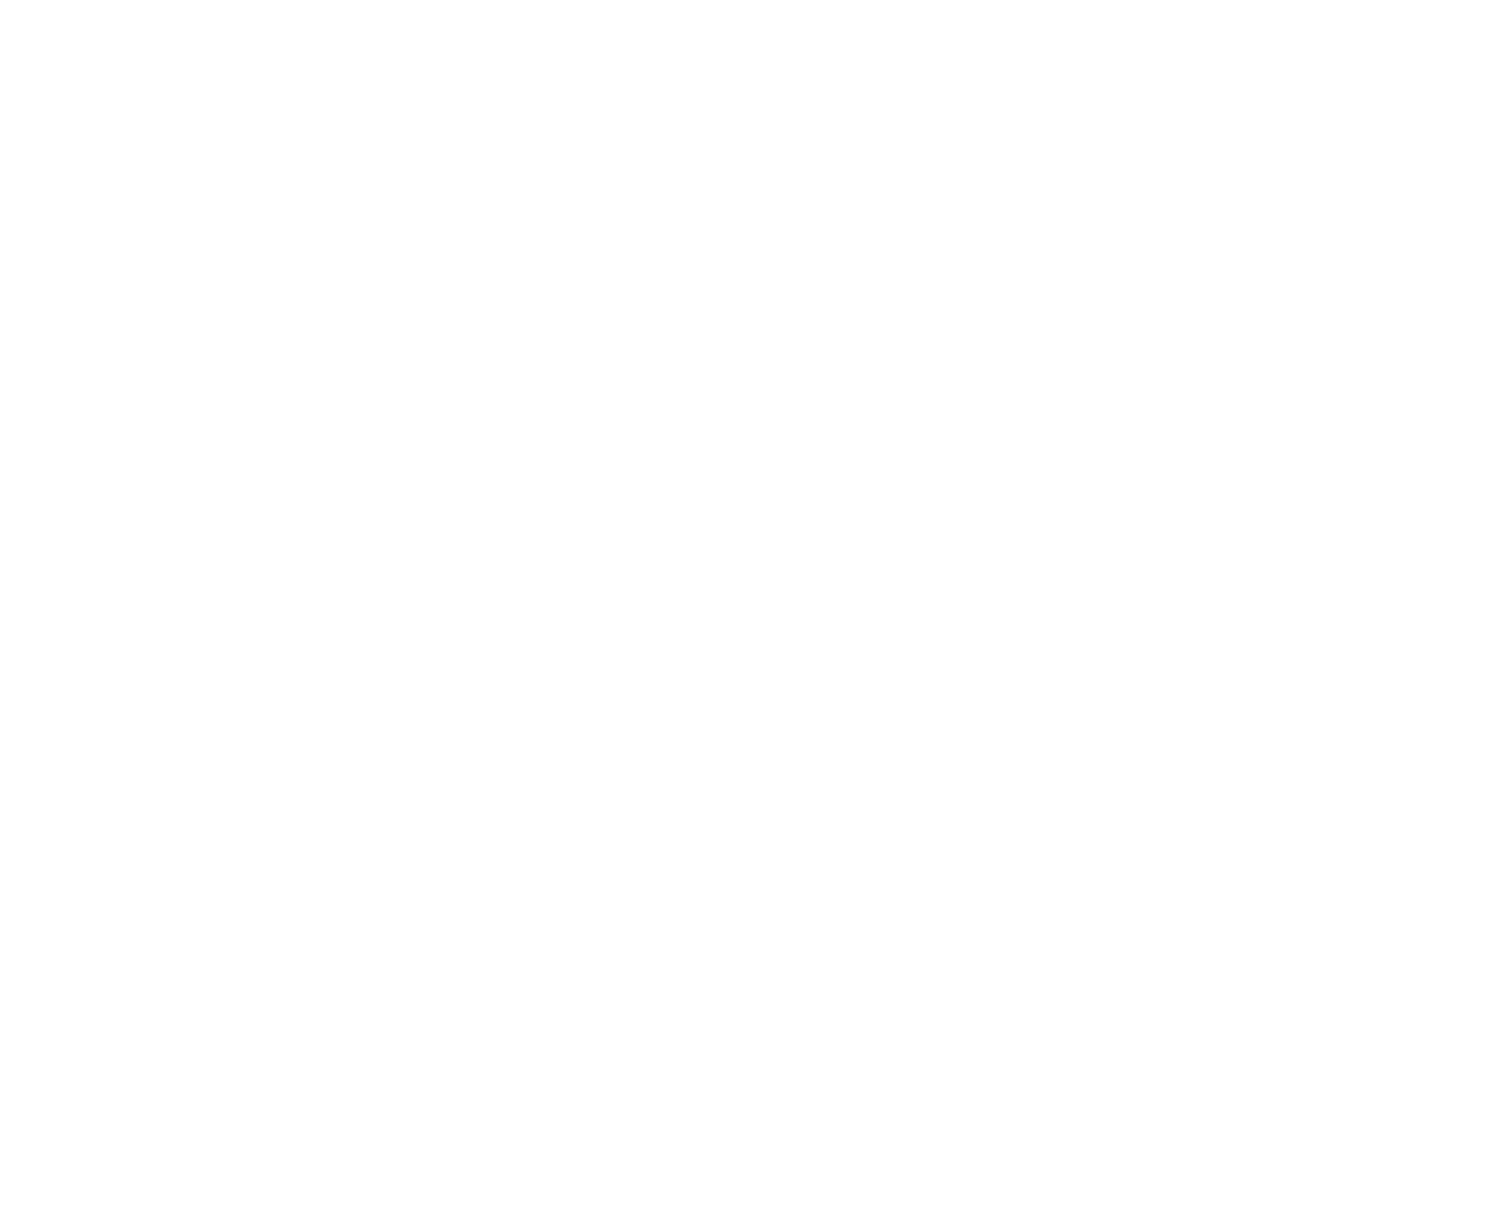 Emanuel "Chris" Welch, Speaker of the Illinois House of Representatives